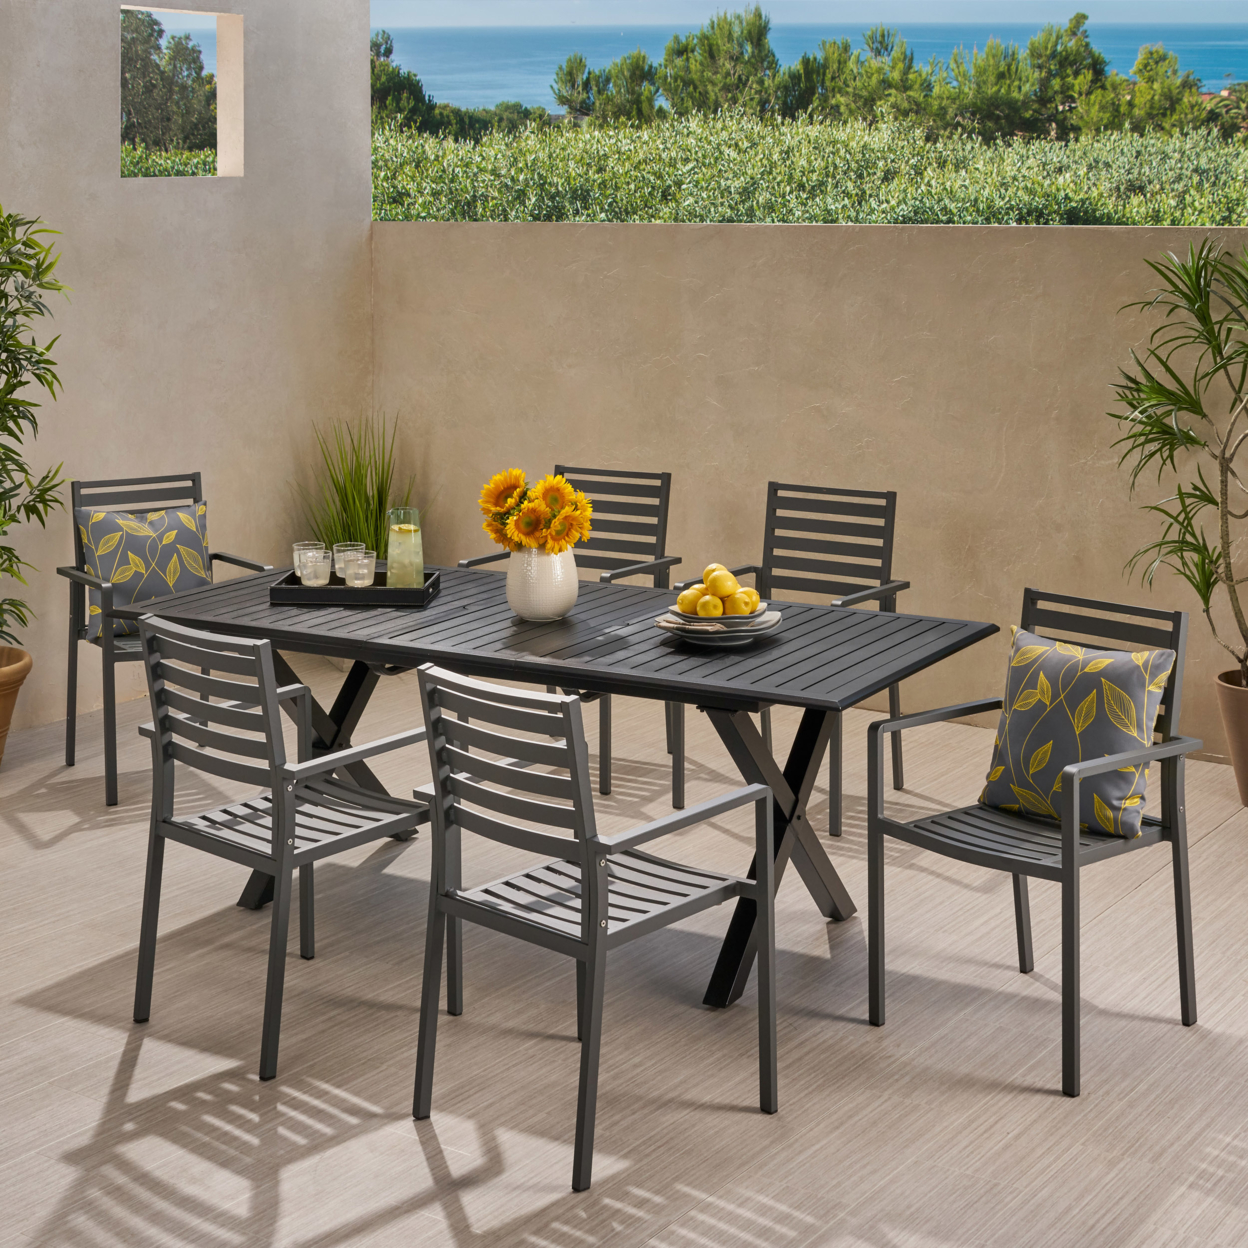 Carrie Outdoor Modern 6 Seater Aluminum Dining Set With Expandable Table